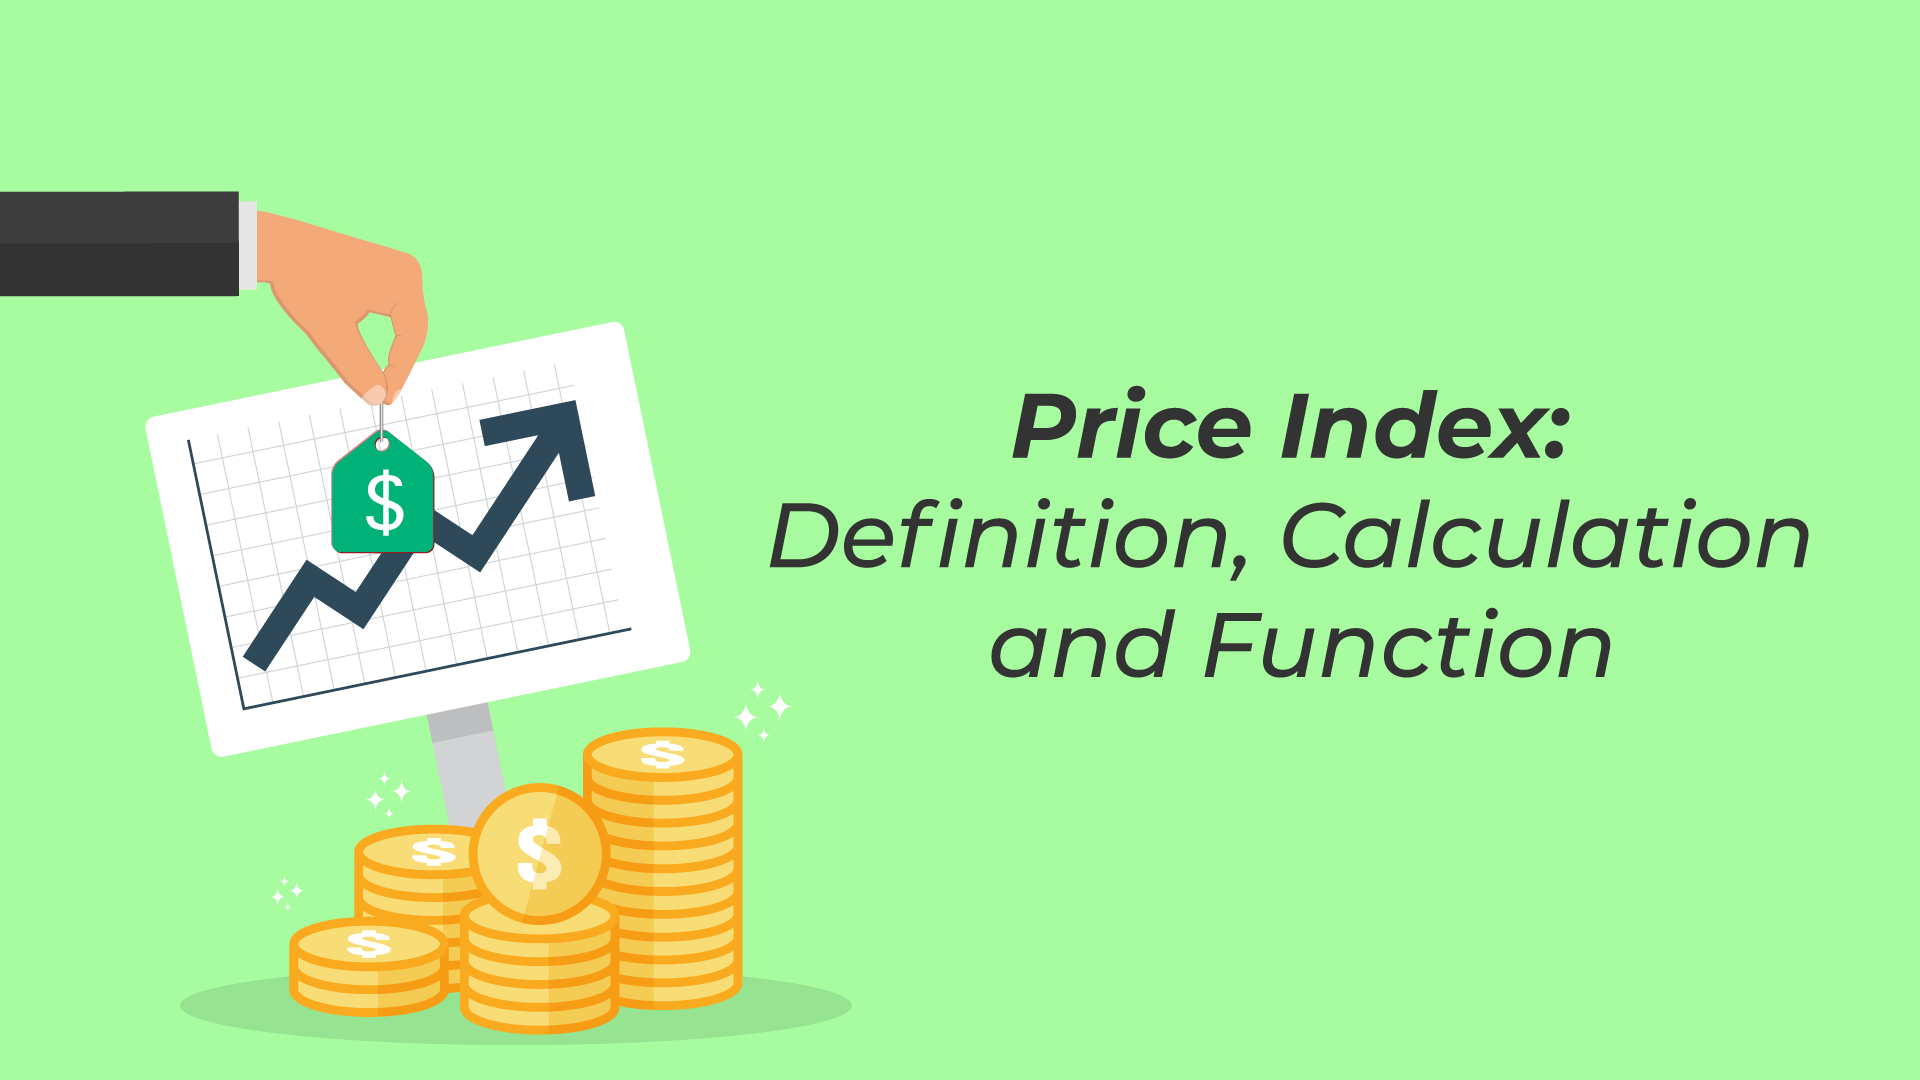 Price Index: Definition, Calculation, and Function